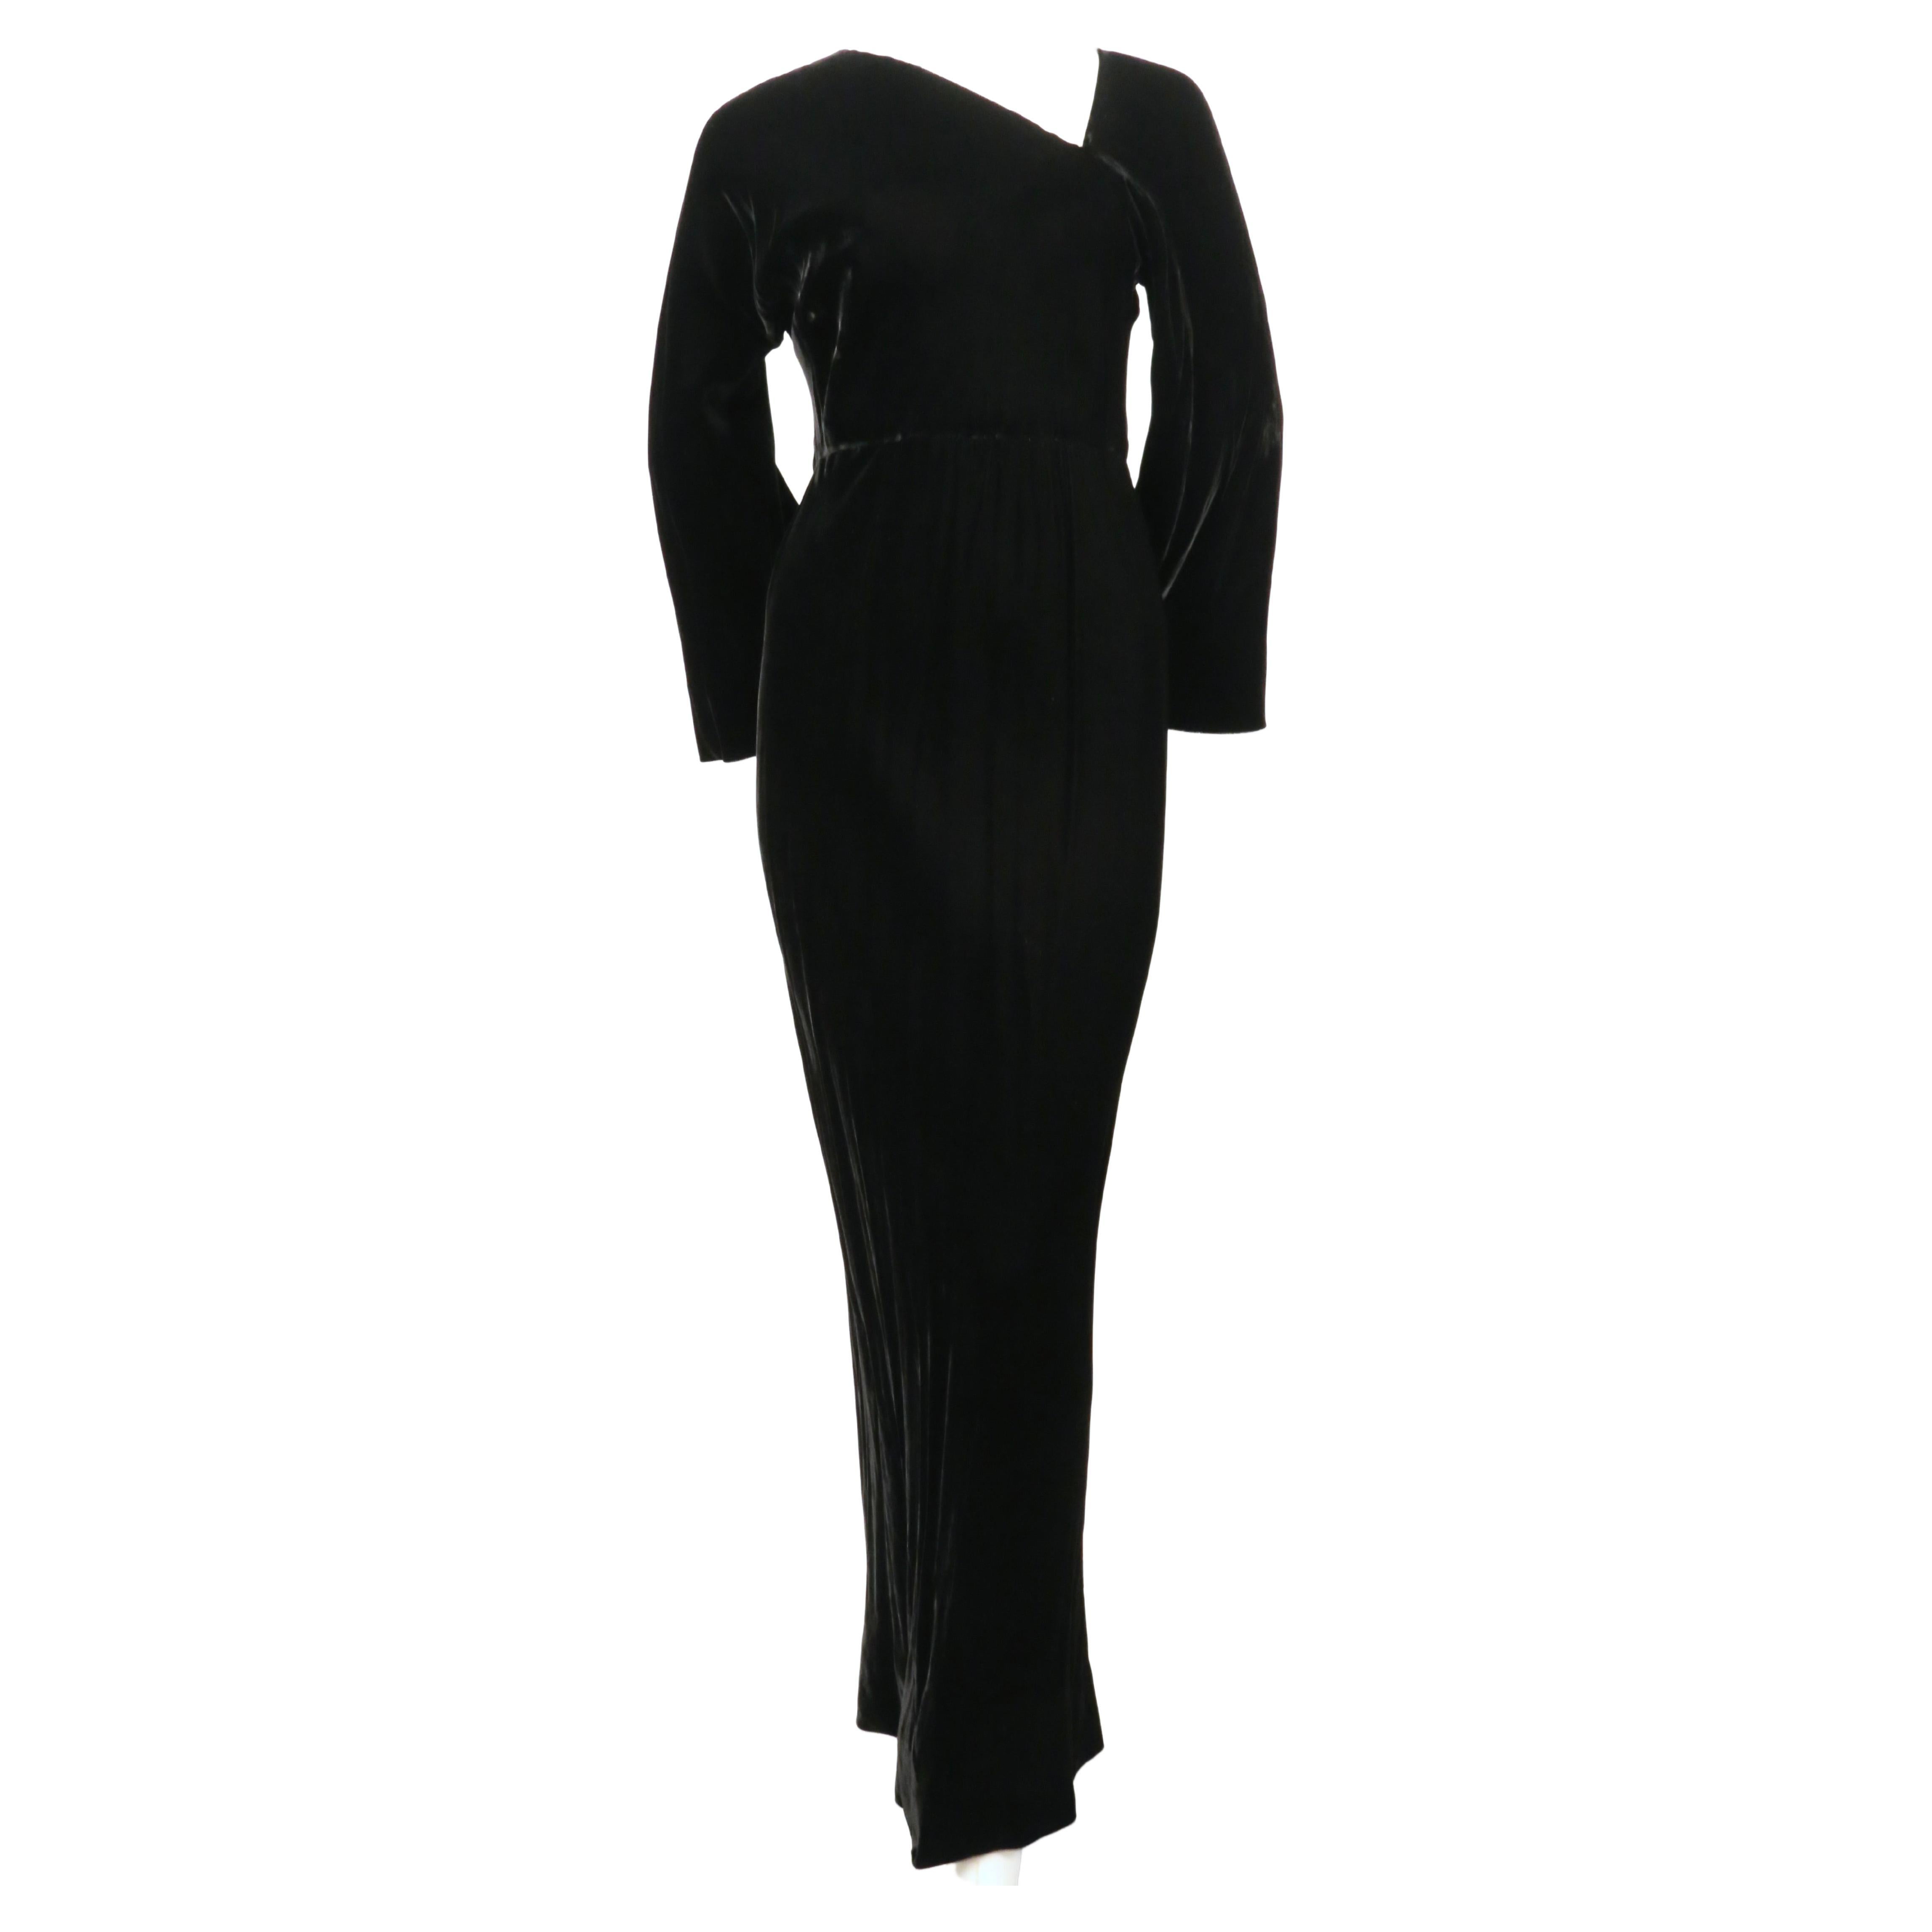 Very rare, jet black velvet, bias cut gown designed by Roy Halston Frowick dating to the 1970's. Labeled a size 4. Dress best fits a 2 to a slim 6. Approximate measurements (unstretched): bust 32